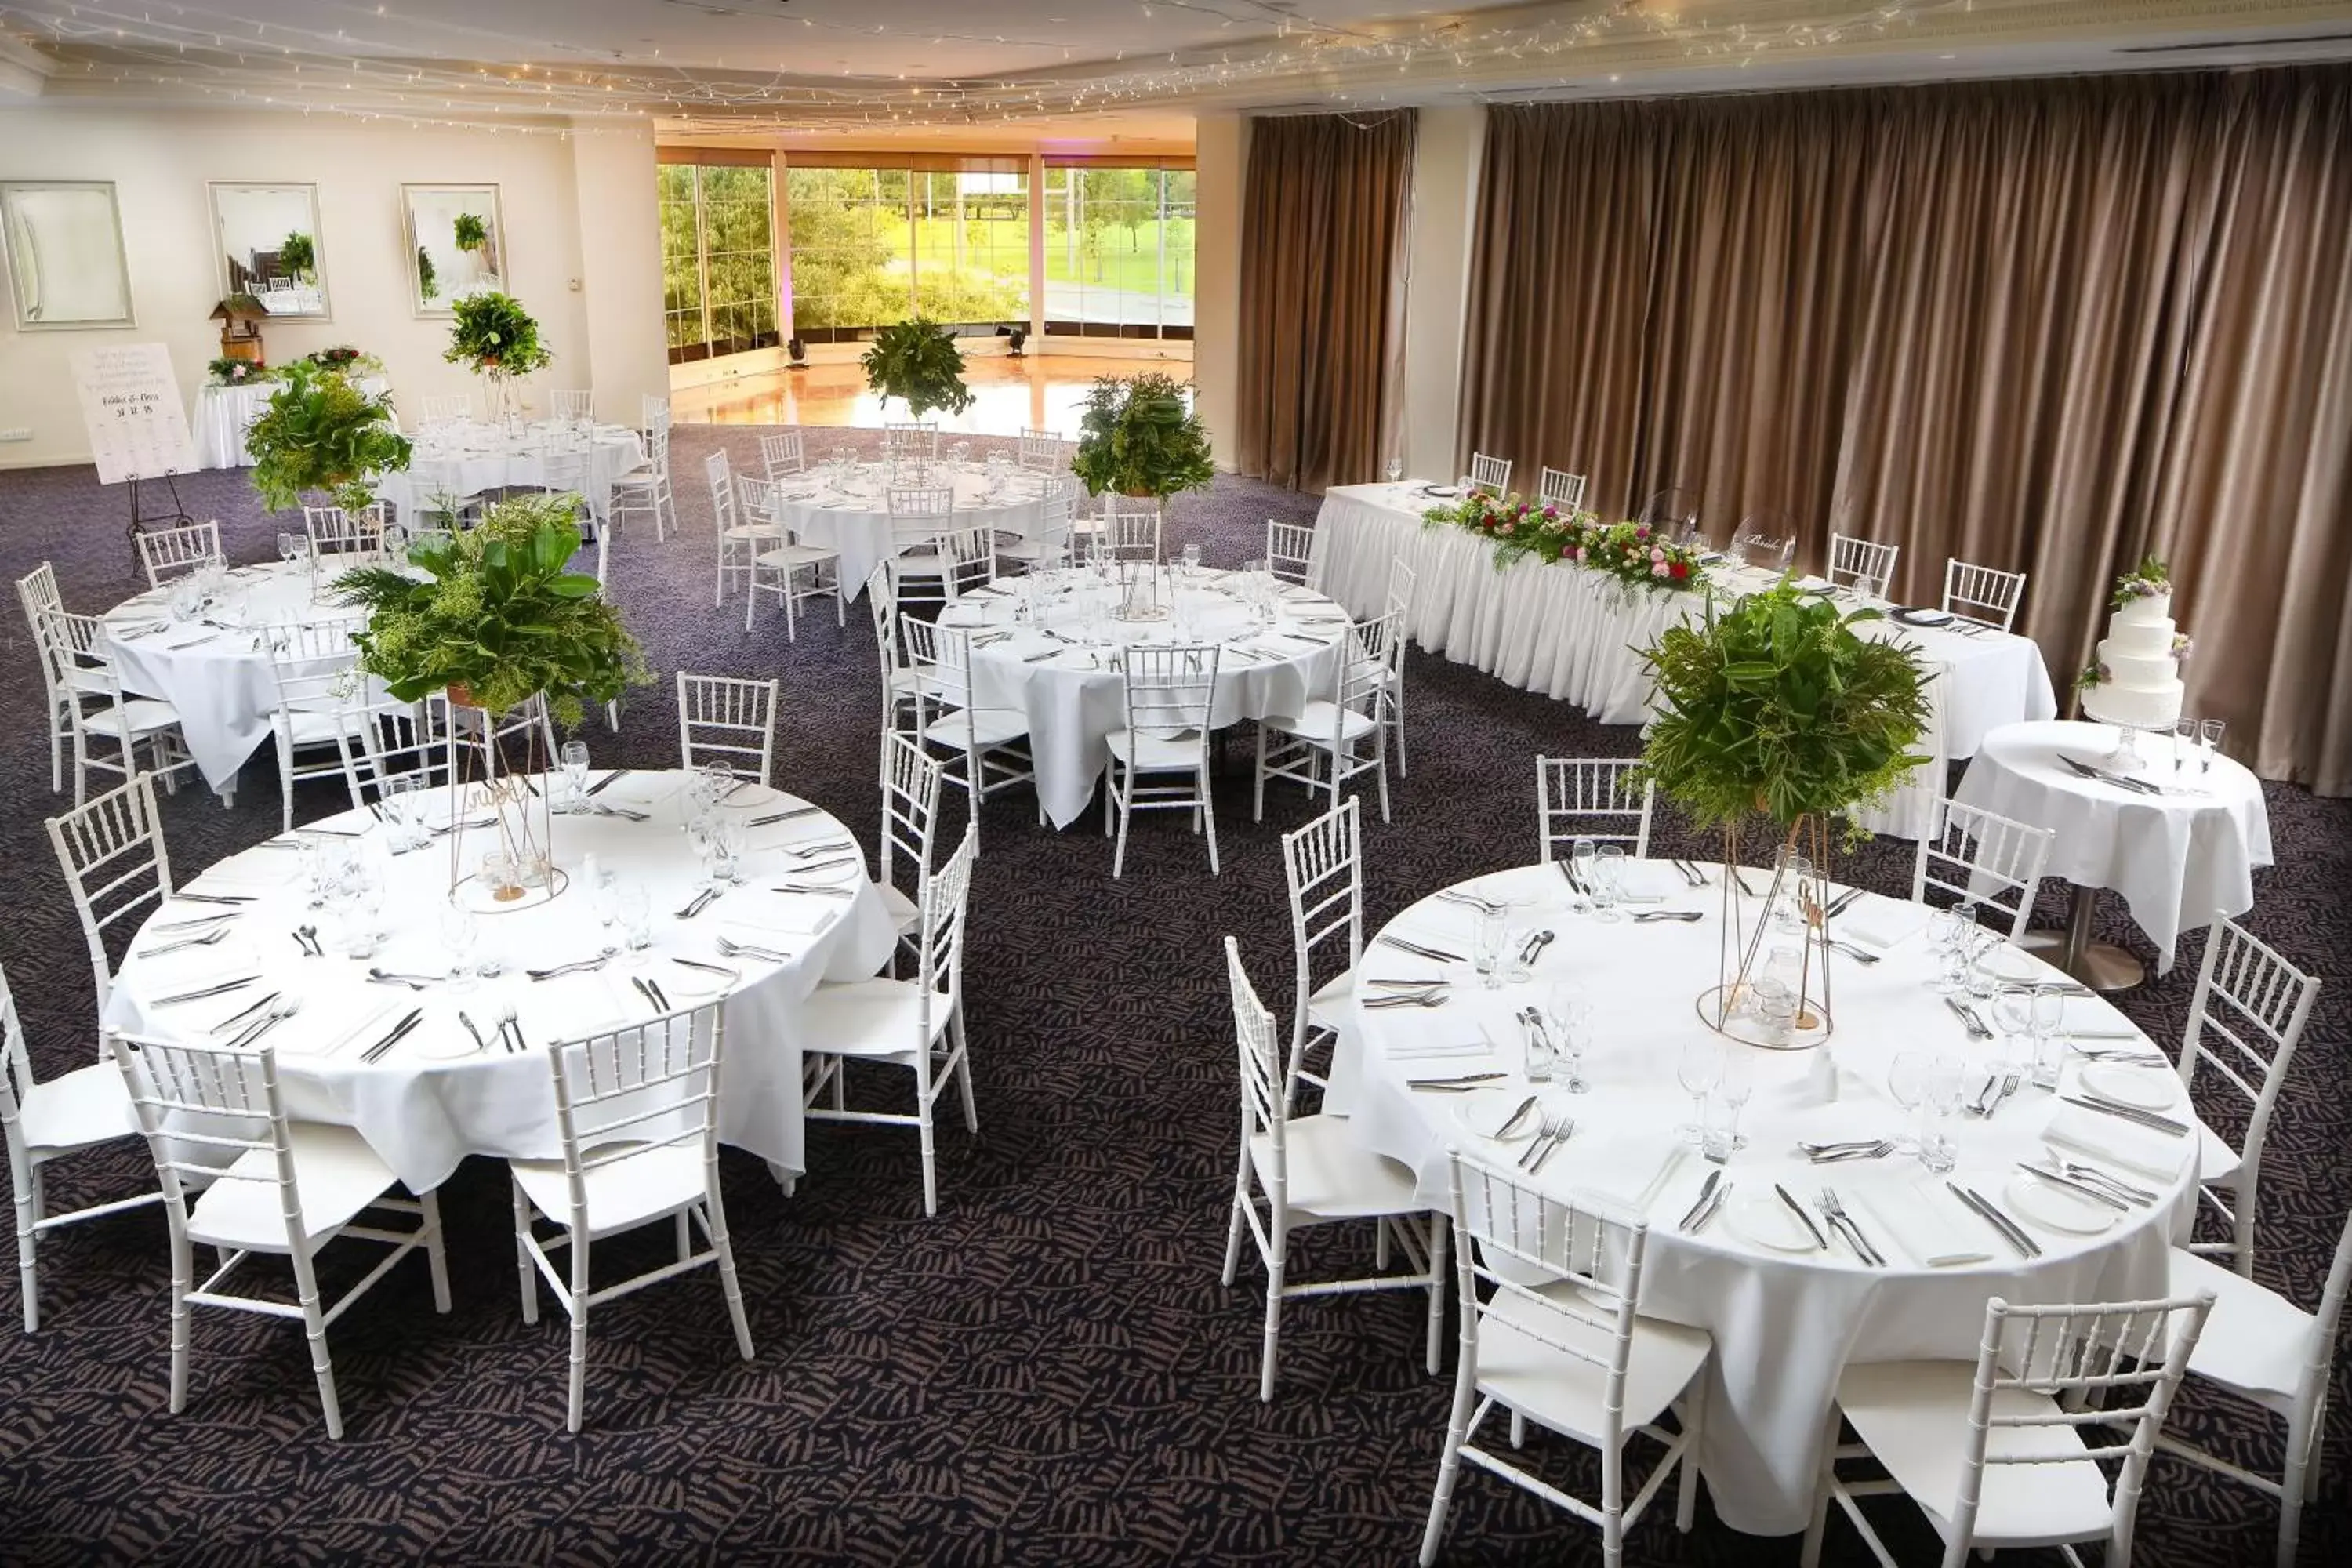 Banquet/Function facilities, Banquet Facilities in Best Western Plus Hovell Tree Inn